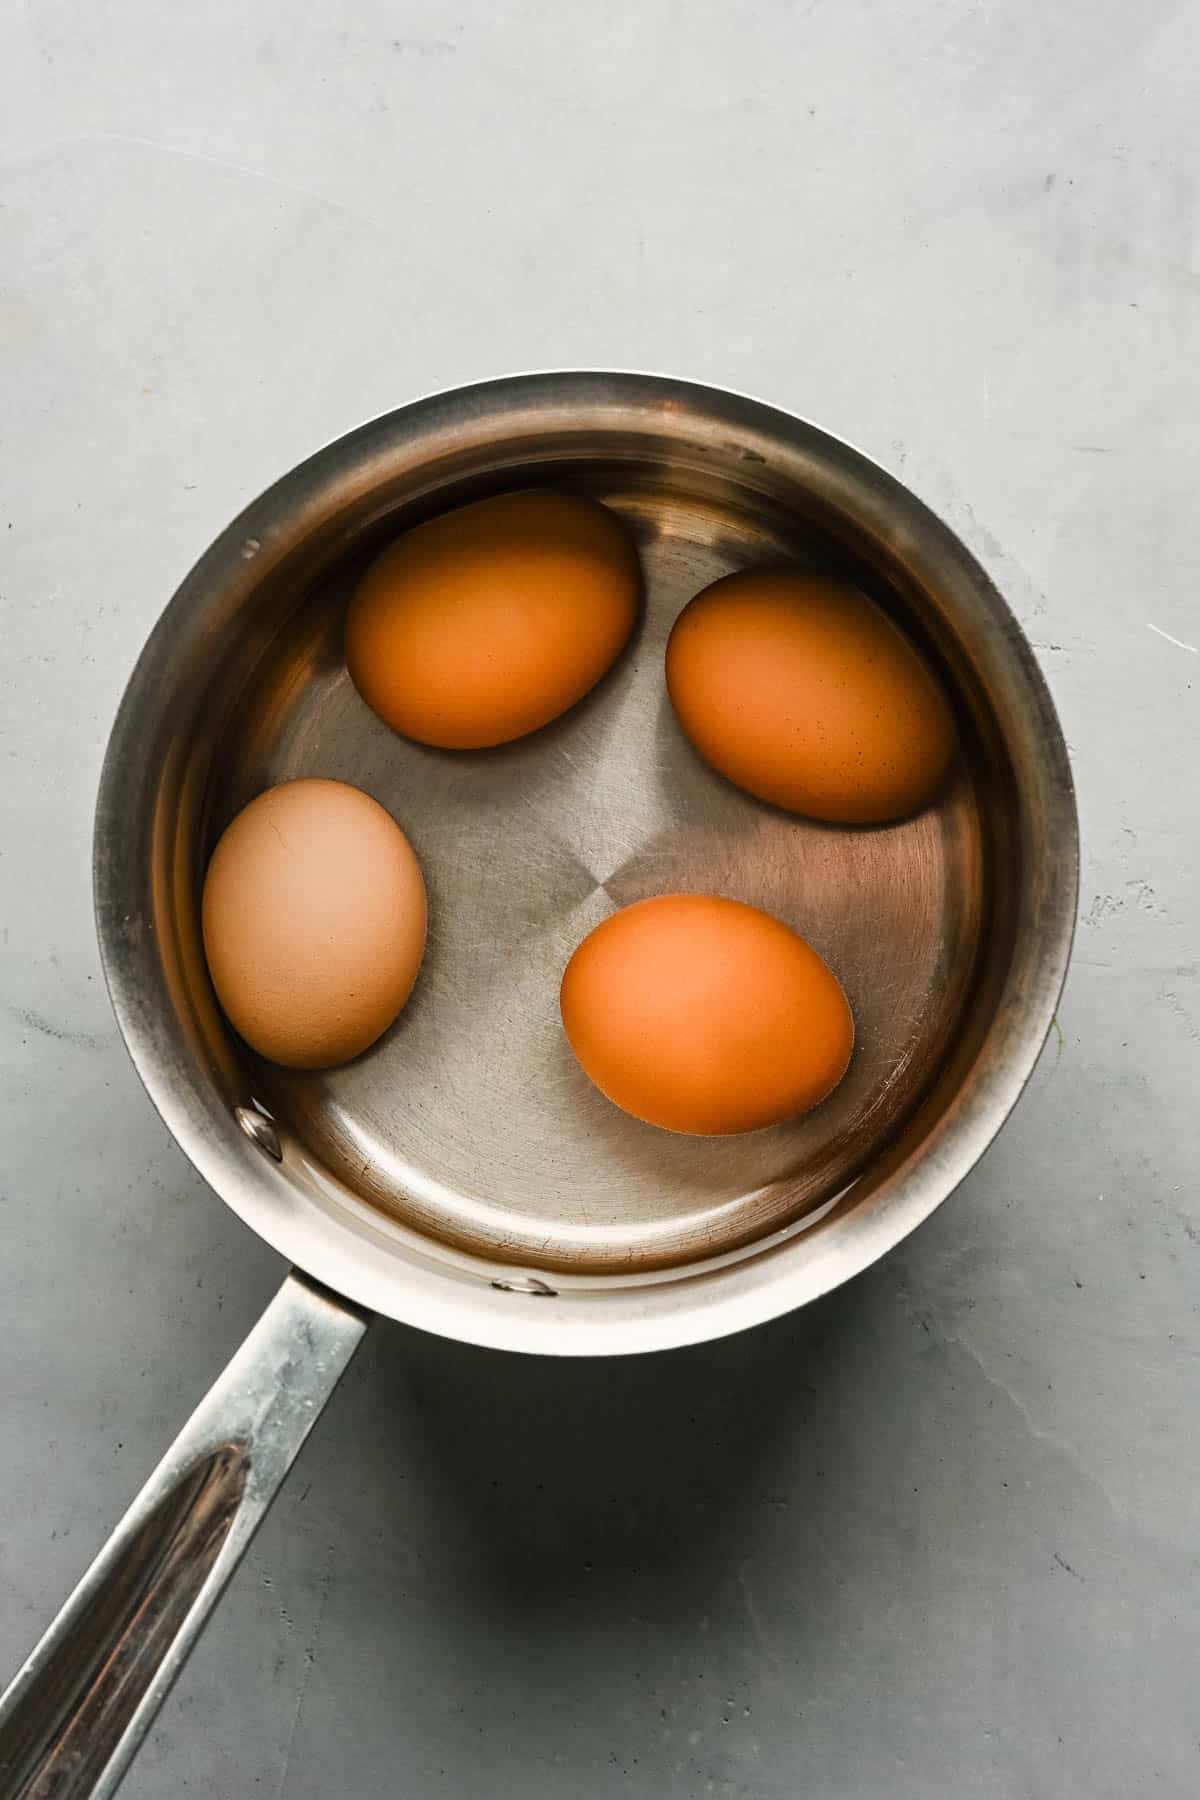 Boiled eggs in a stainless steel saucepan.